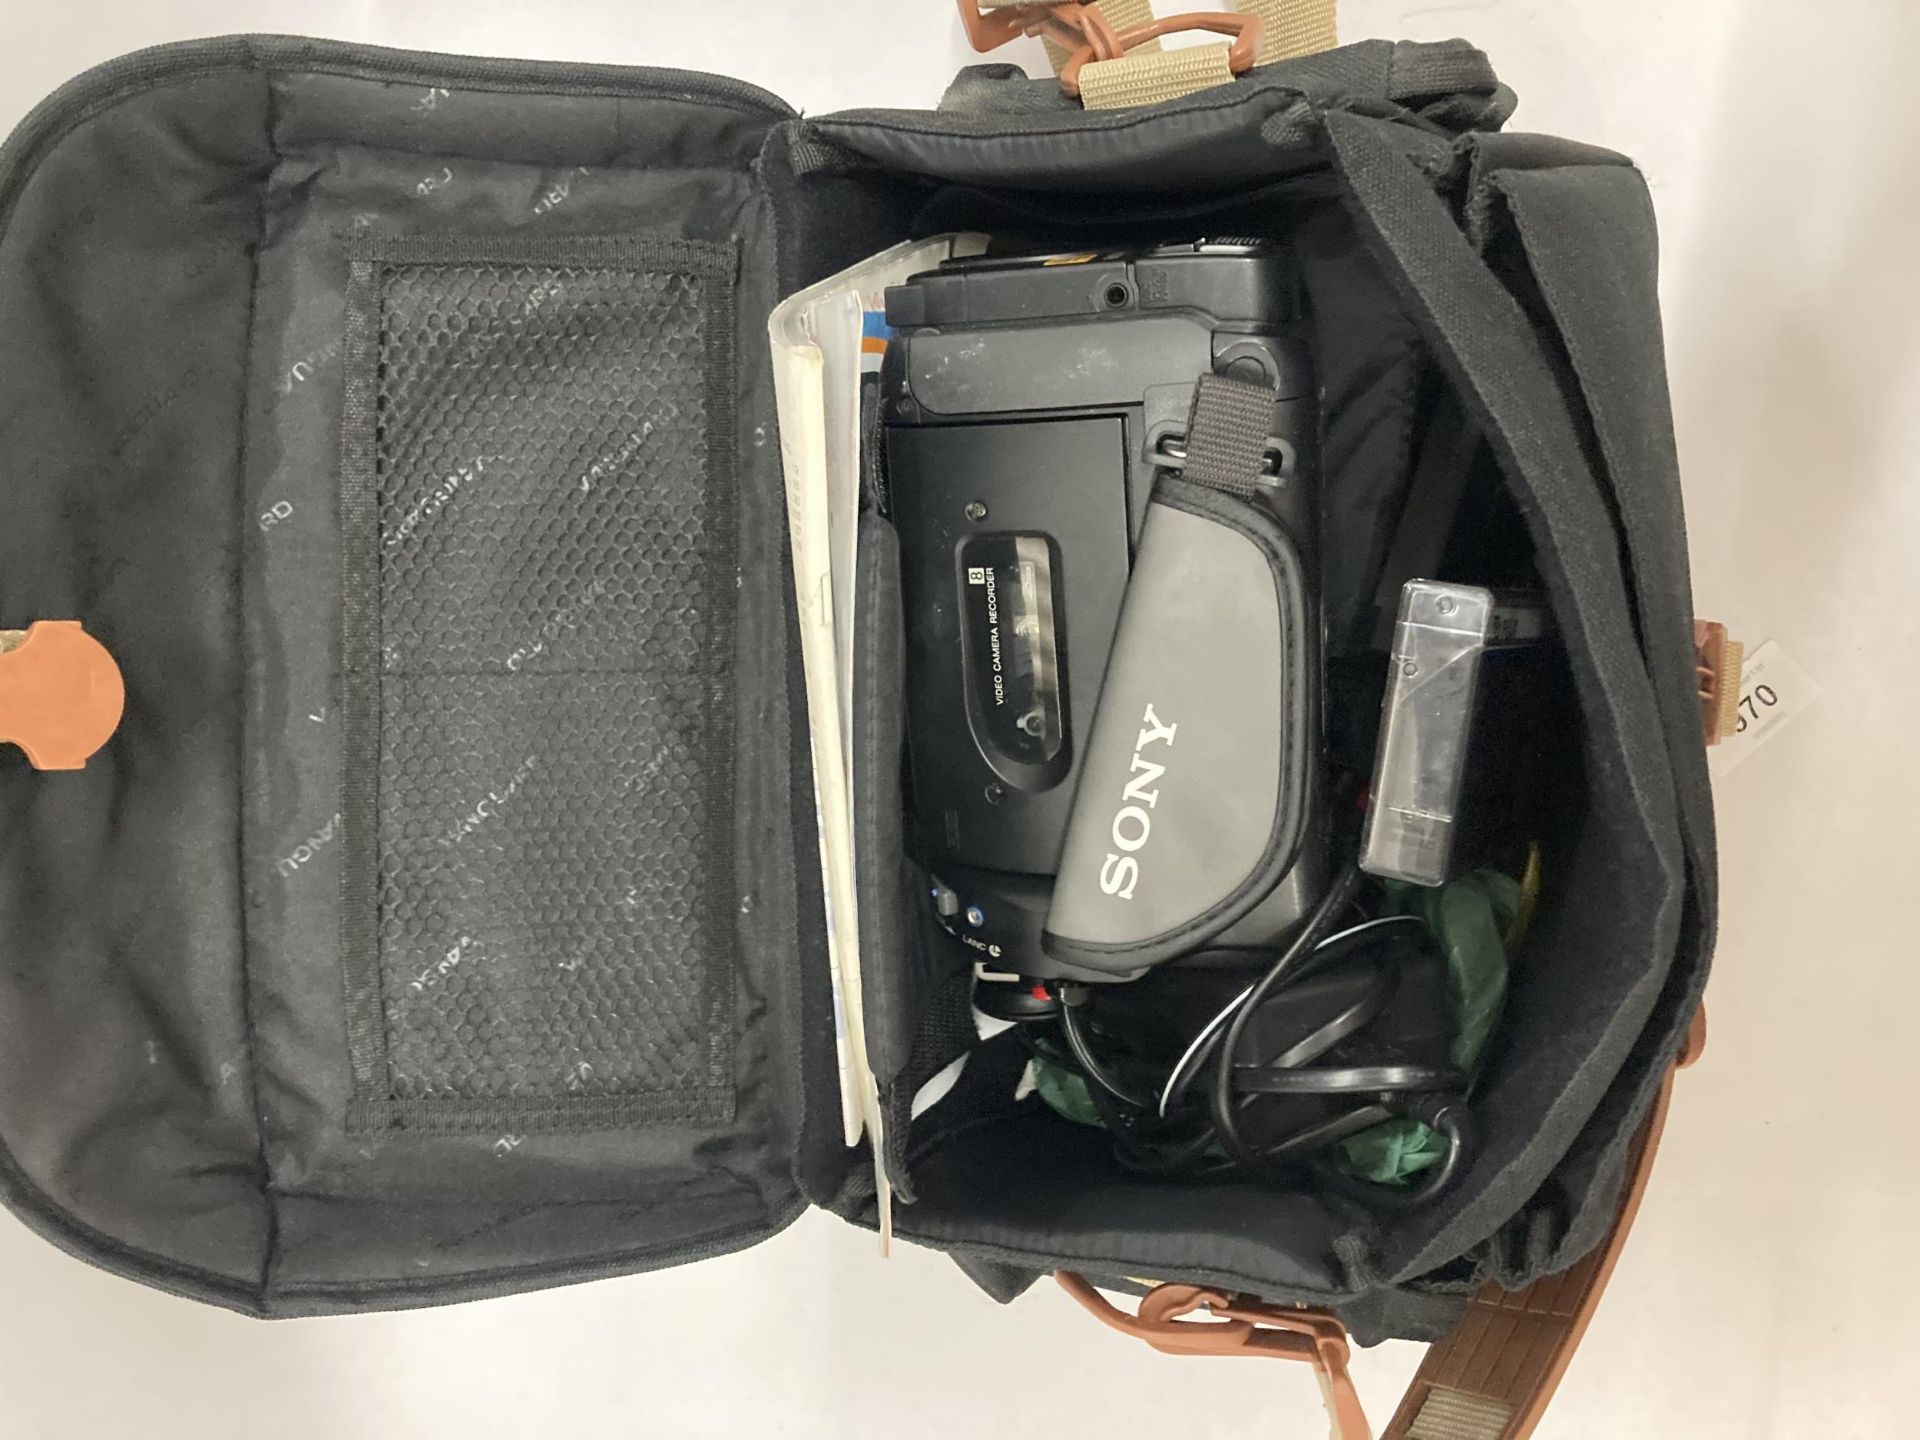 A SONY VIDEO CAMERA RECORDER WITH ACCESSORIES IN A VANGUARD BAG - Image 2 of 10